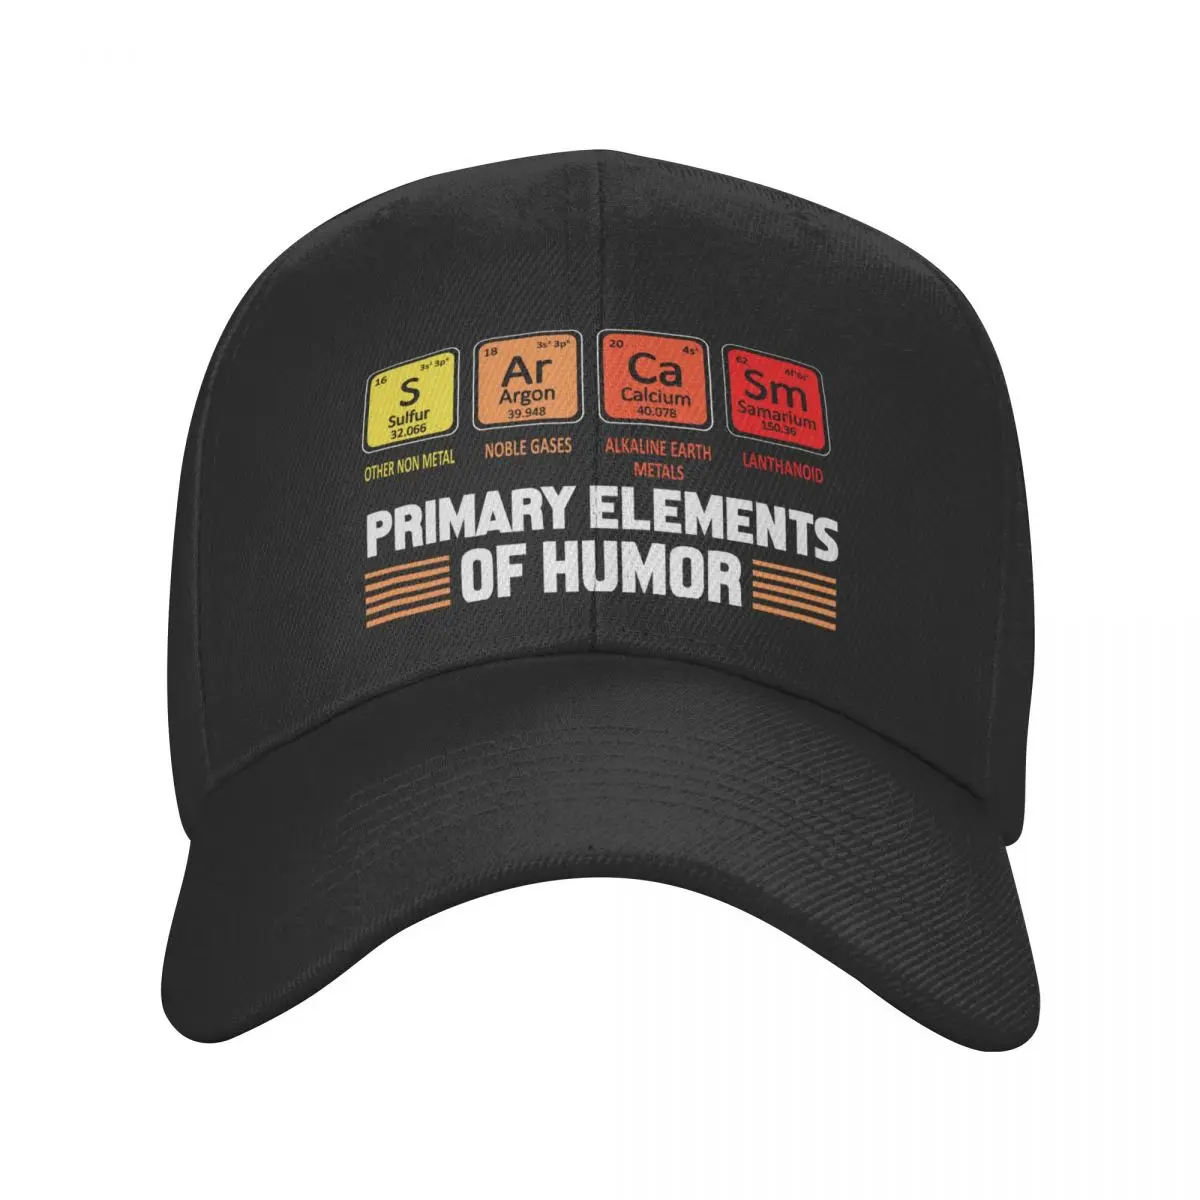 

New Primary Elements Of Humor Science Sarcasm Baseball Cap Men Women Breathable S Ar Ca Sm Periodic Table Dad Hat Sport